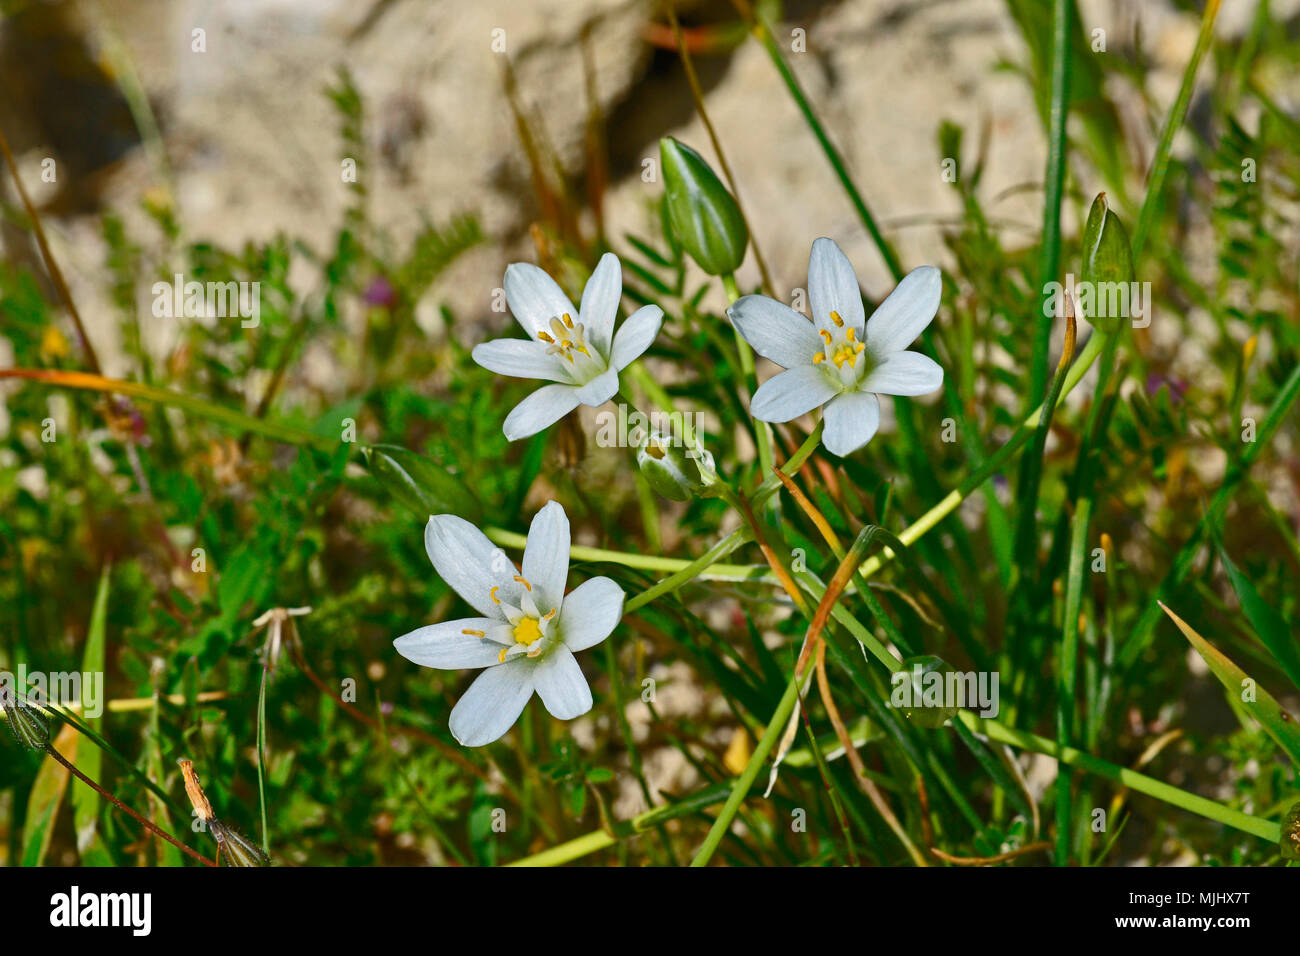 A Ornithogalum montanum growing wild in the Cyprus countryside Stock Photo